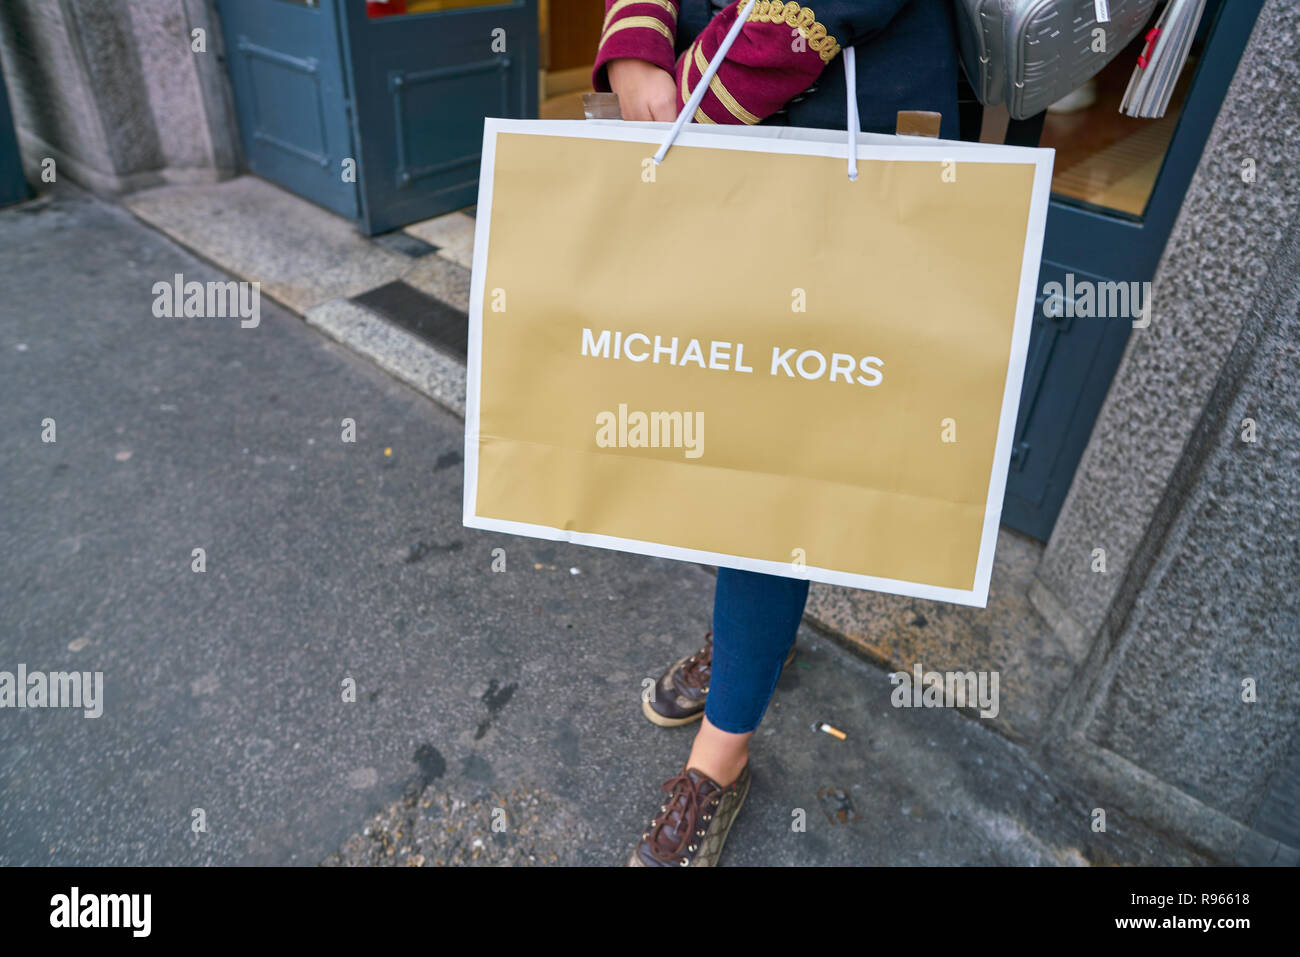 MILAN, ITALY - CIRCA NOVEMBER, 2017: a woman stand with a Michael Kors  branded shopping bag in Milan Stock Photo: 229403140 - Alamy